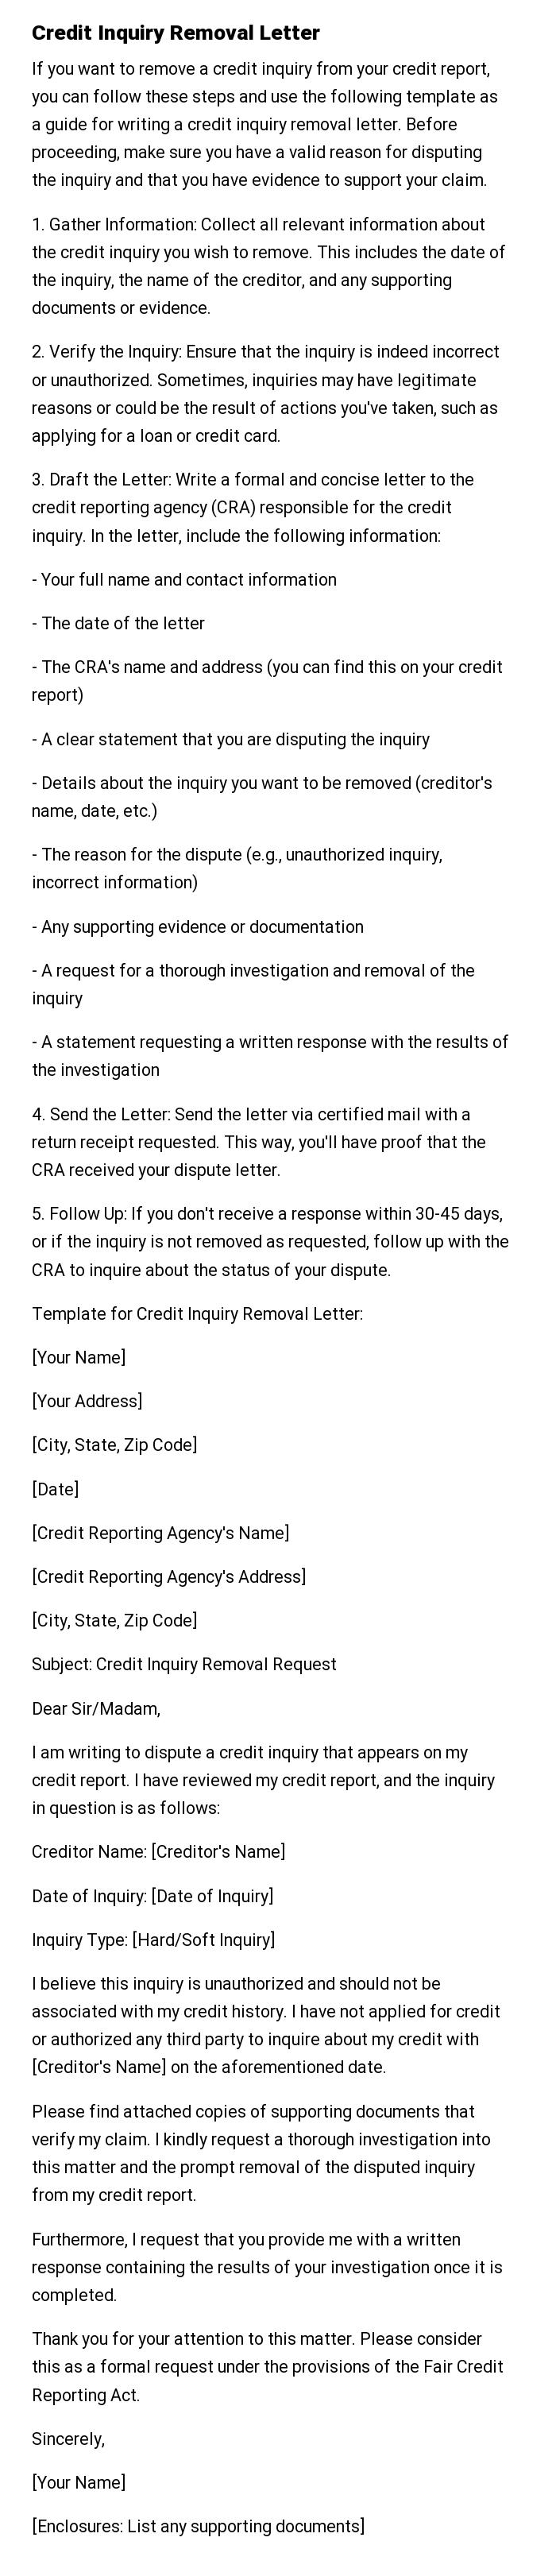 Credit Inquiry Removal Letter